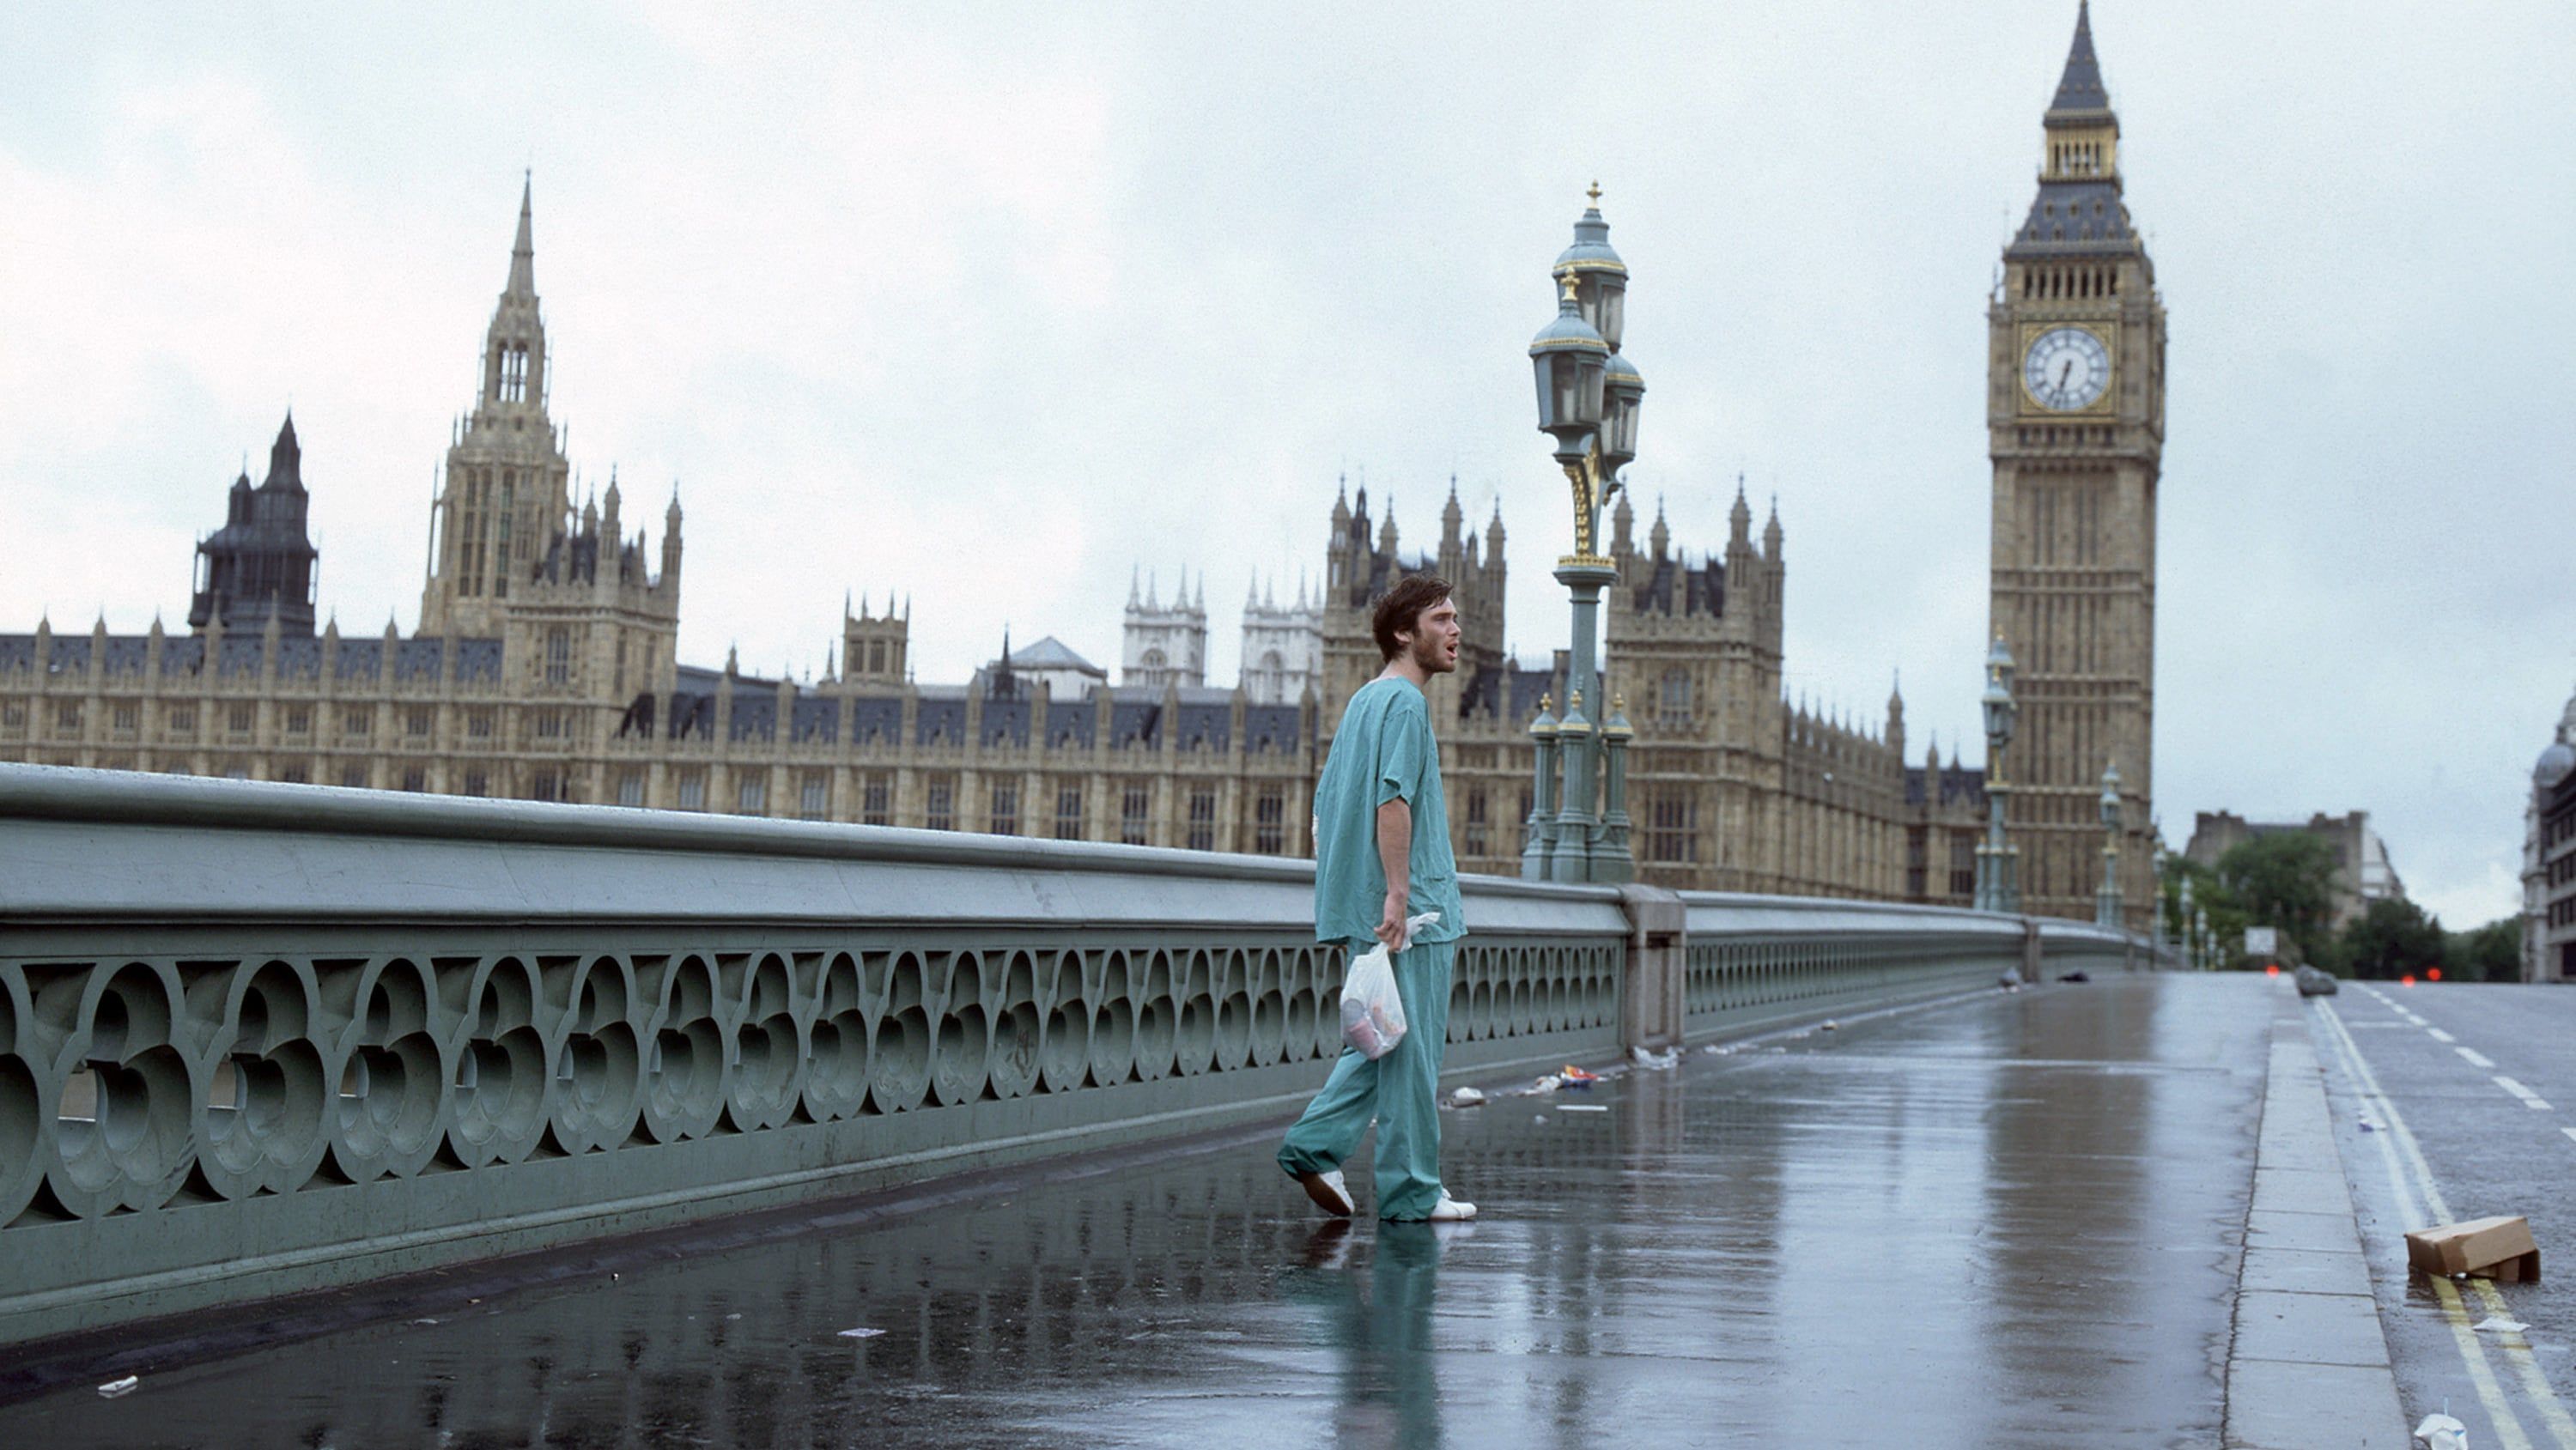 28 Days Later (2003)